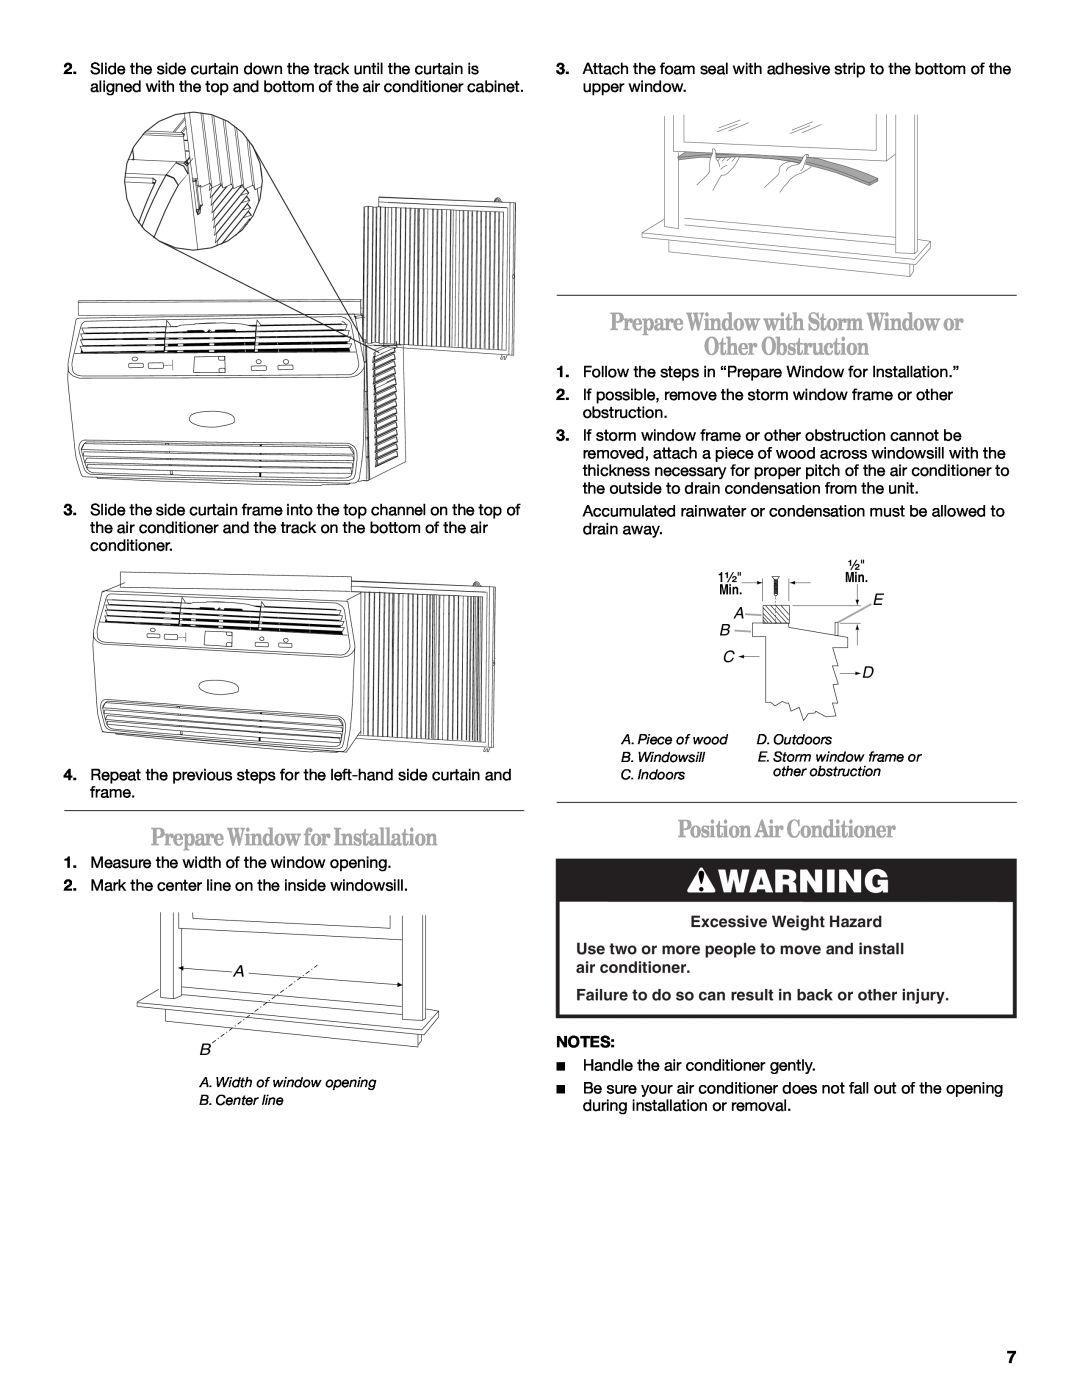 Whirlpool 66161279 manual Prepare Window for Installation, Prepare Window withStorm Window or, Other Obstruction 